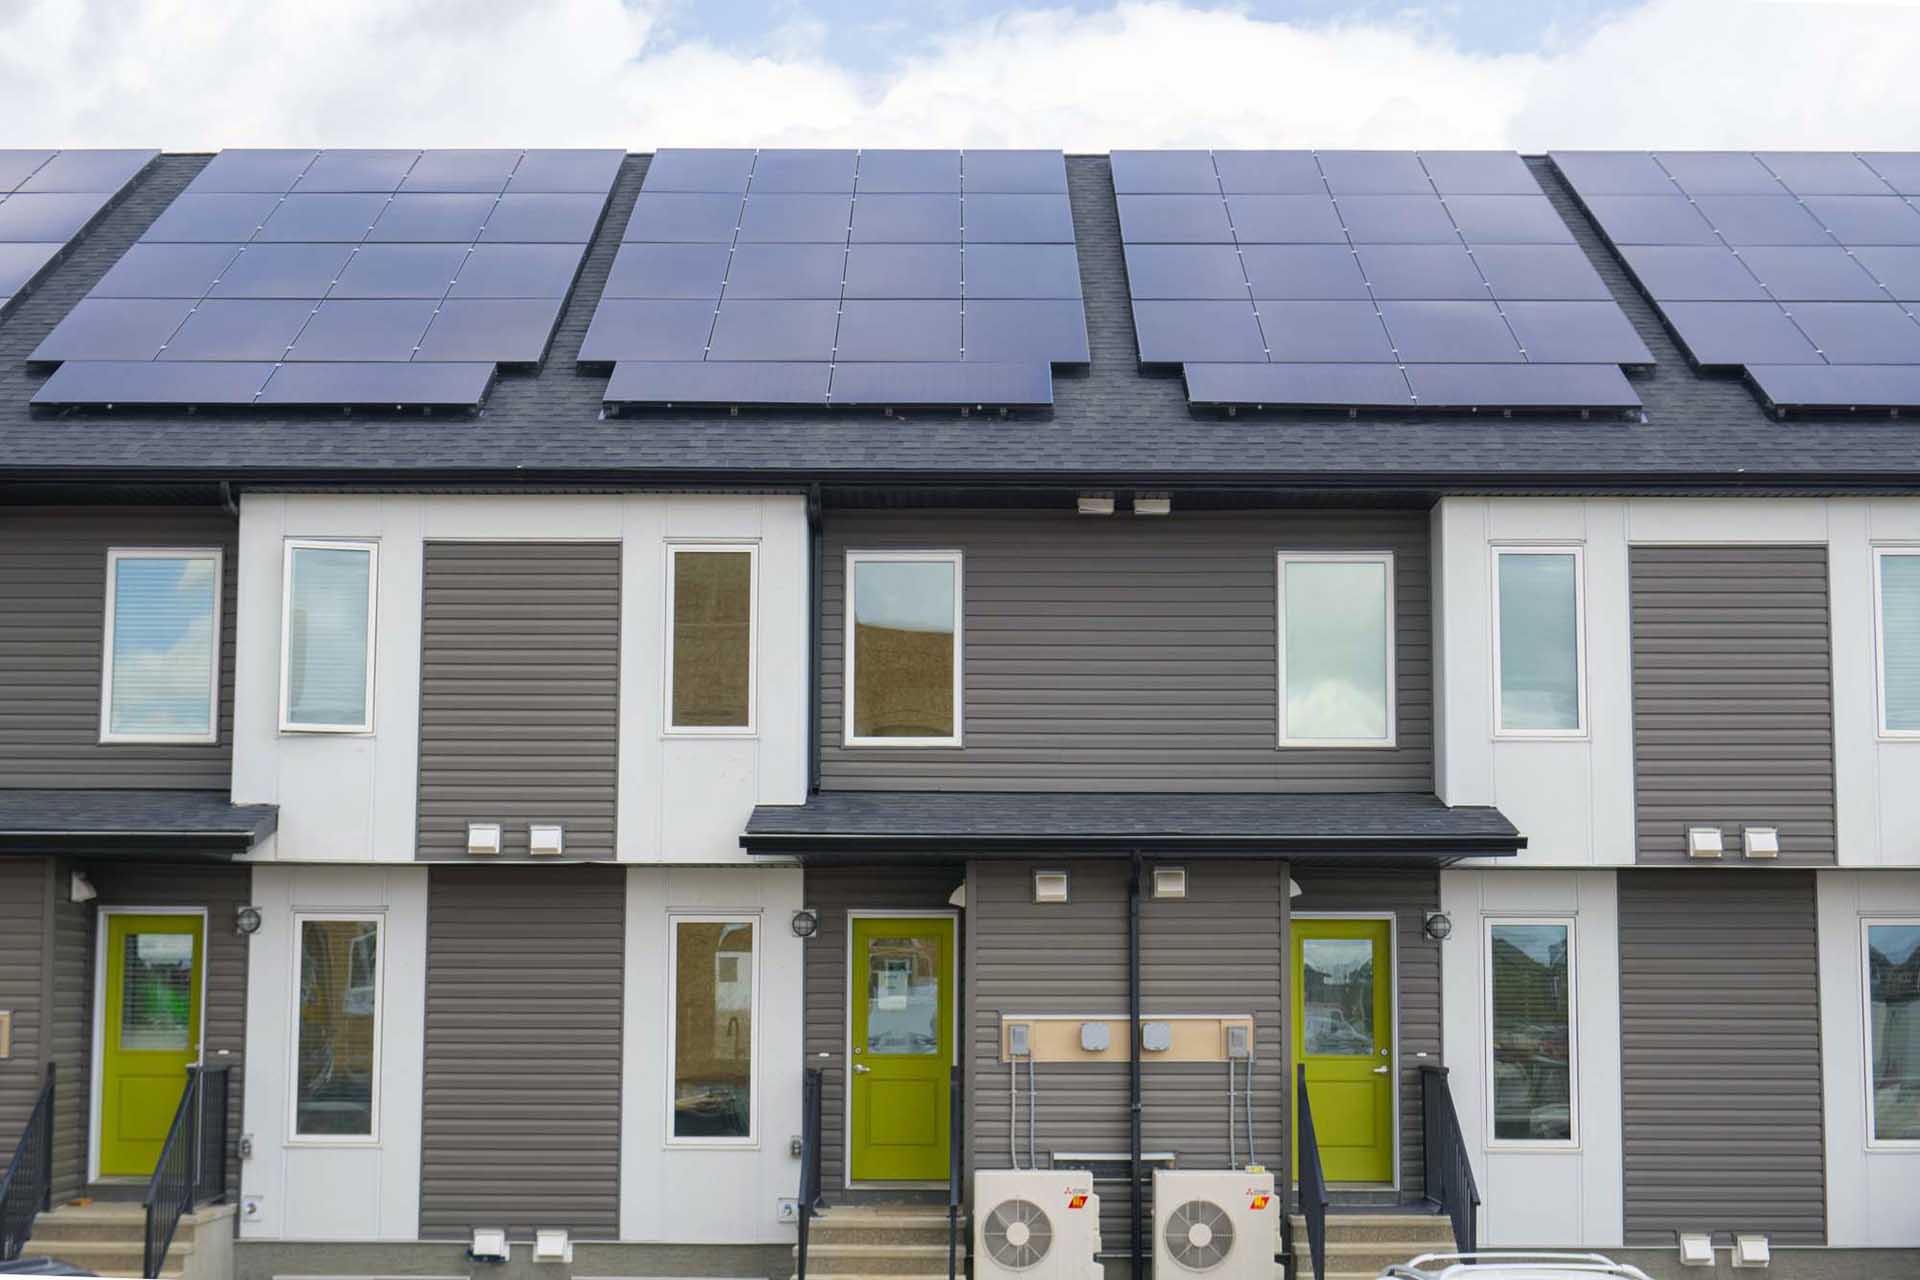 ZEN Sequel net zero building with a roof fully covered in solar panels and back doors of these townhomes in a brigh green colour